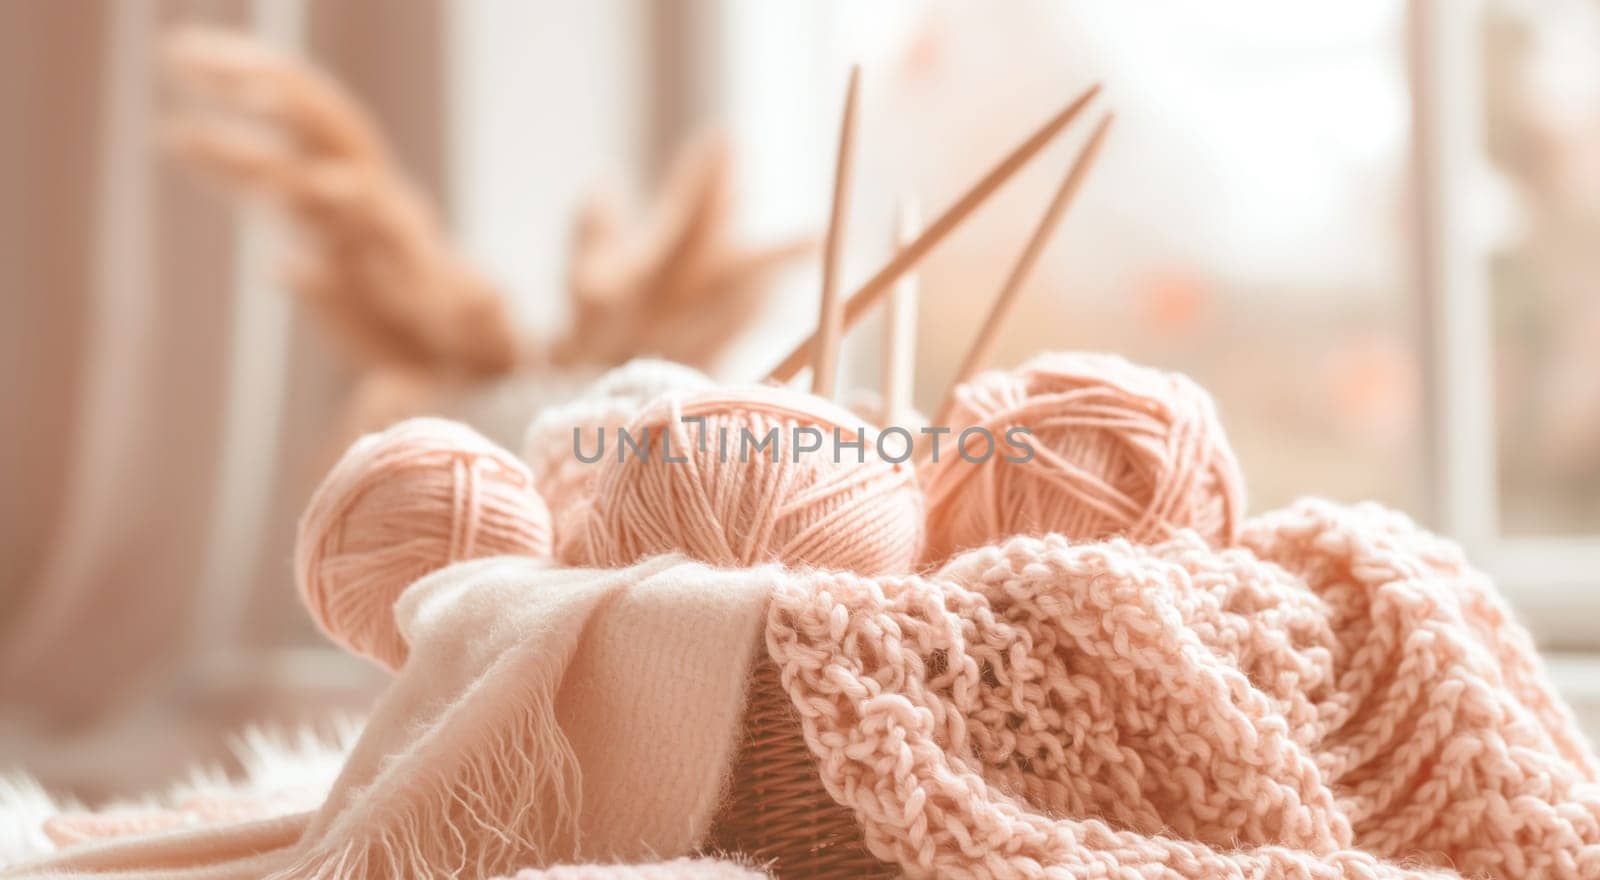 Knitting needles and yarn balls in basket with soft focus. by kizuneko